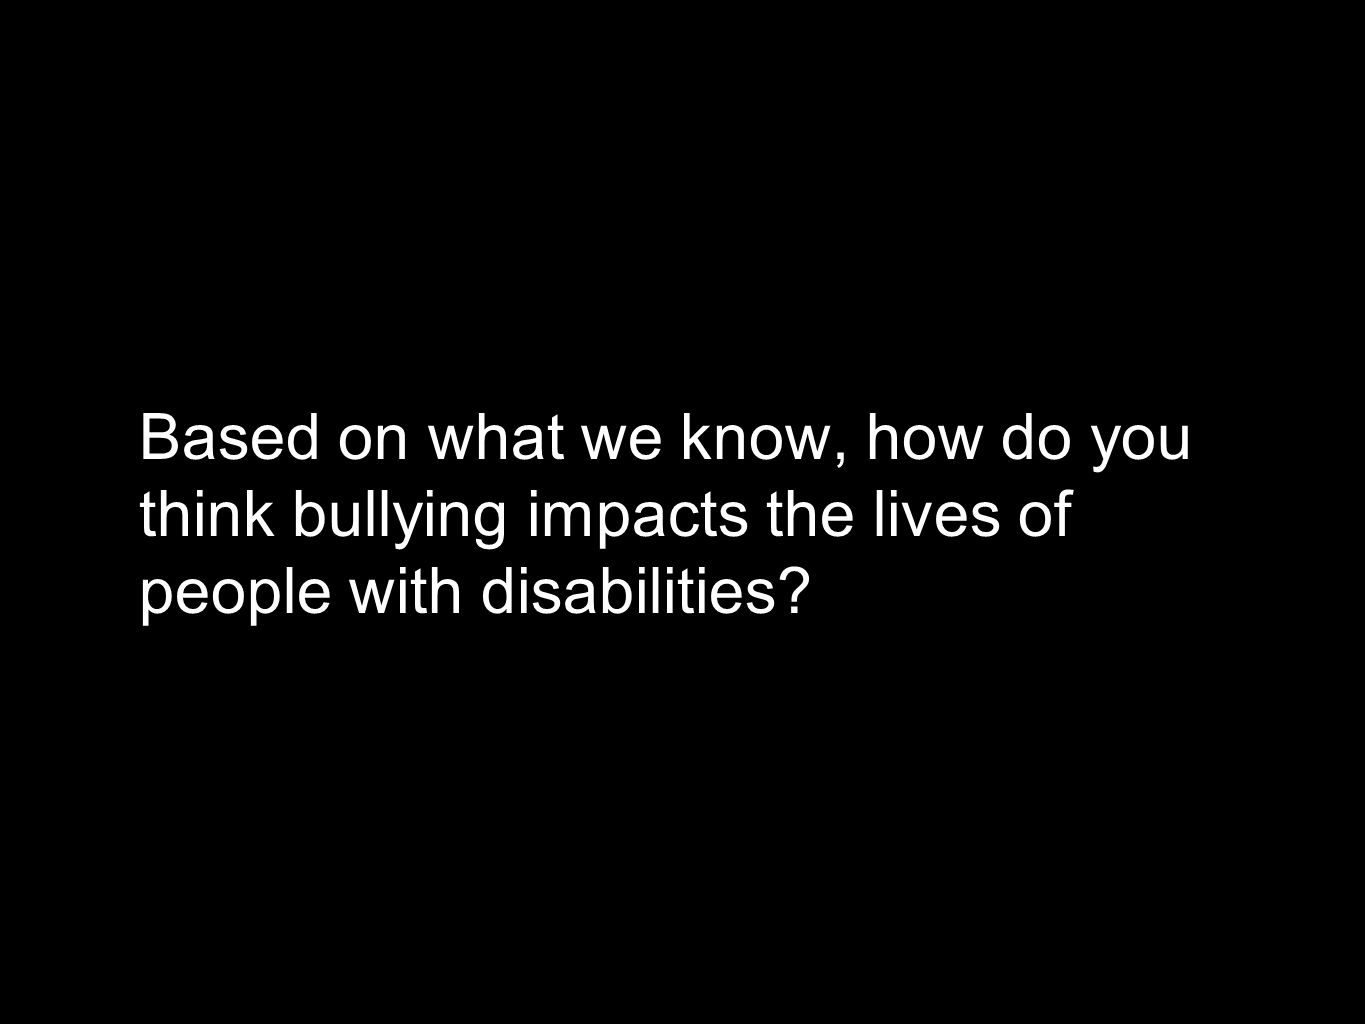 Based on what we know, how do you think bullying impacts the lives of people with disabilities